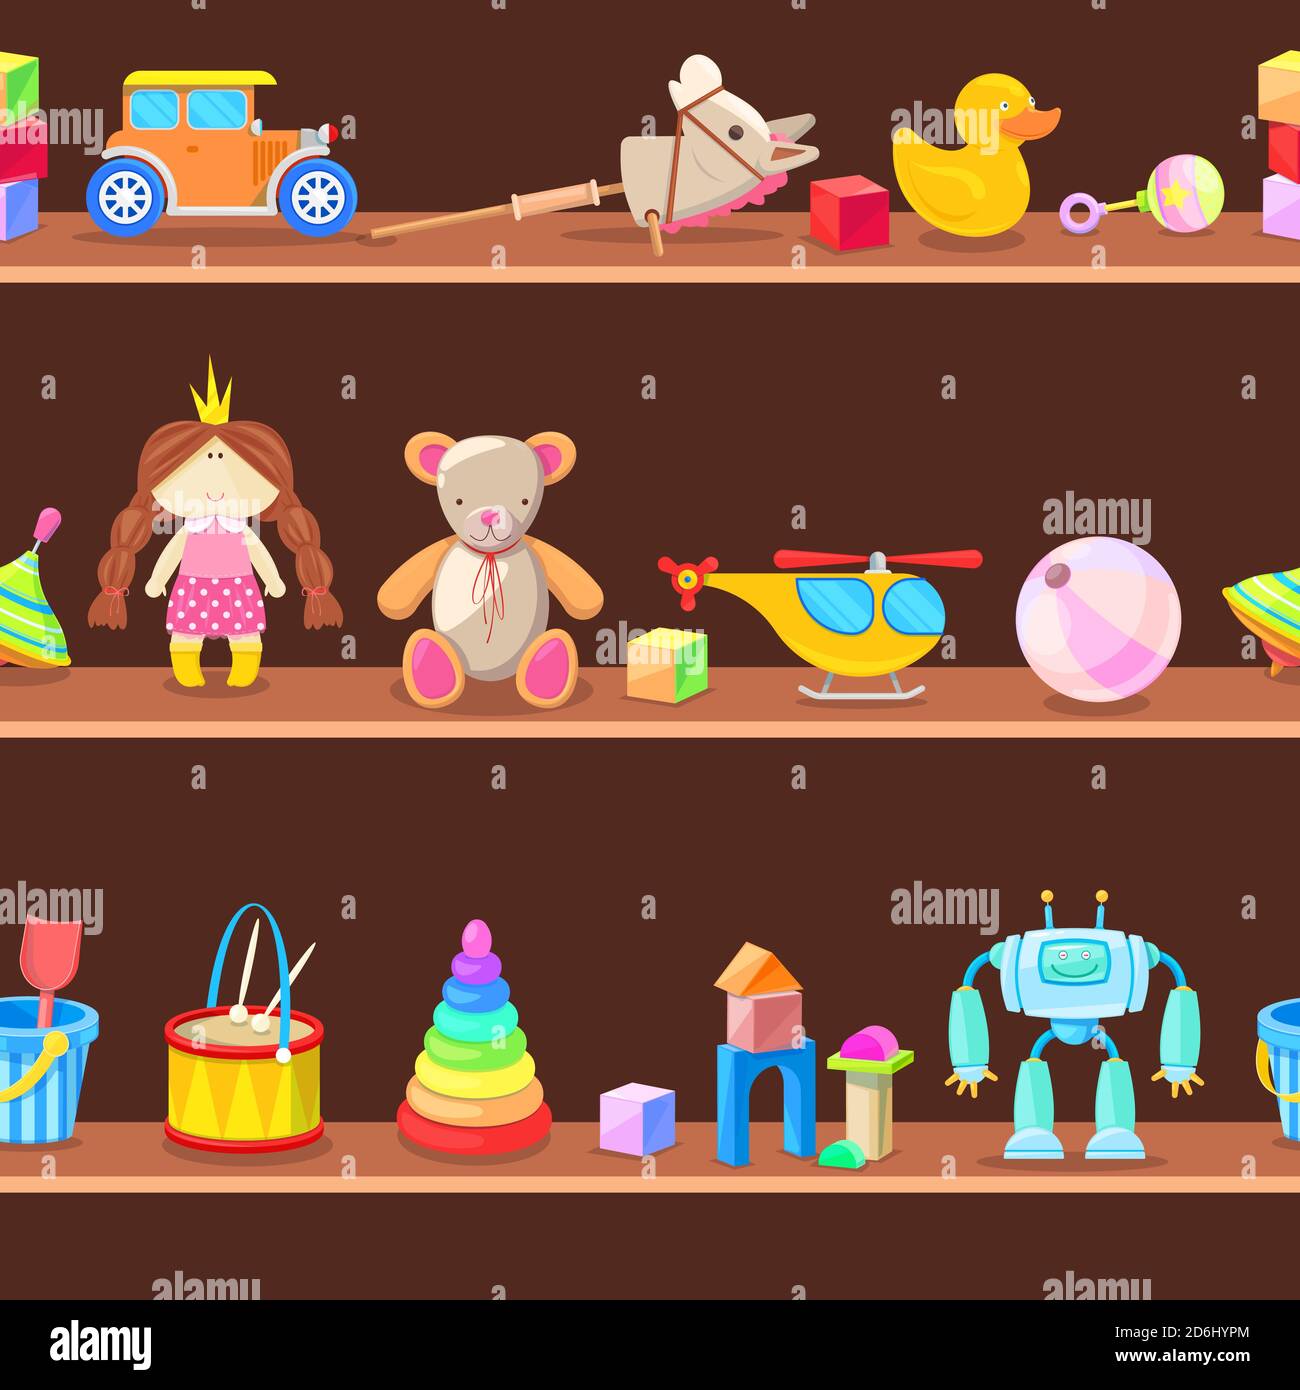 Wooden cabinet with kids toys on shelves. Seamless vector background. Playroom or store illustration. Stock Vector